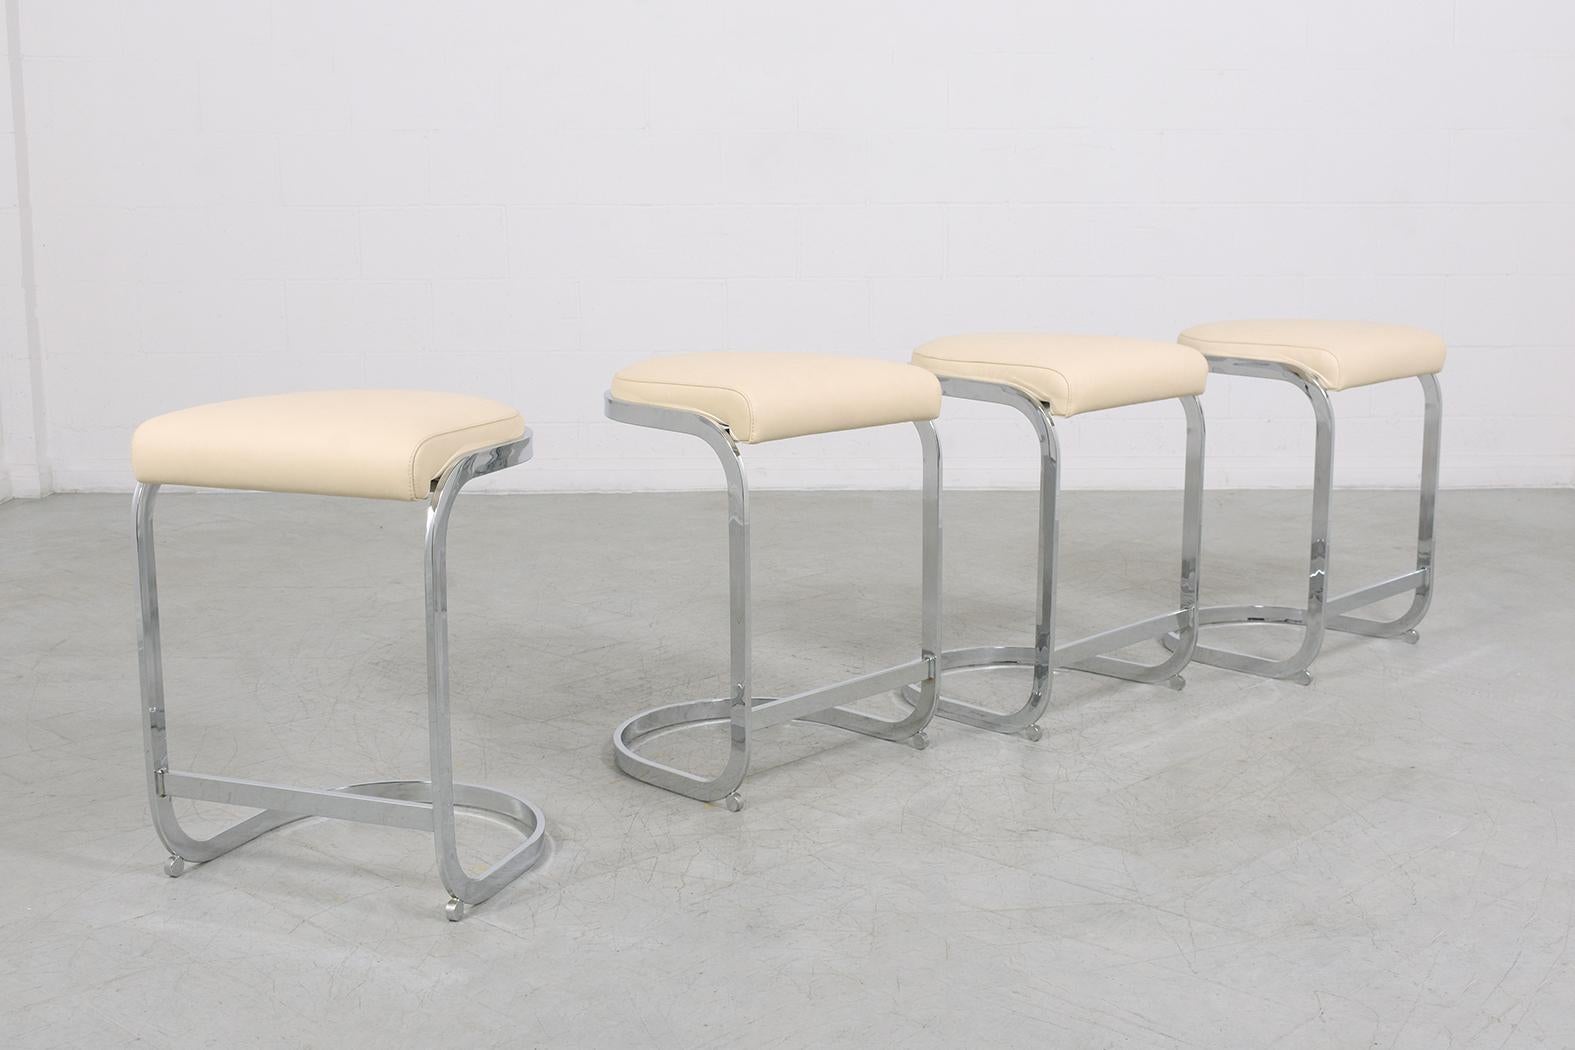 This extraordinary set of four Mid-Century Modern style barstools is hand-crafted out of steel finished in chrome and is in great condition, these fabulous set of four stools are eye-catching sleek design and feature a sturdy steel frame \\ with